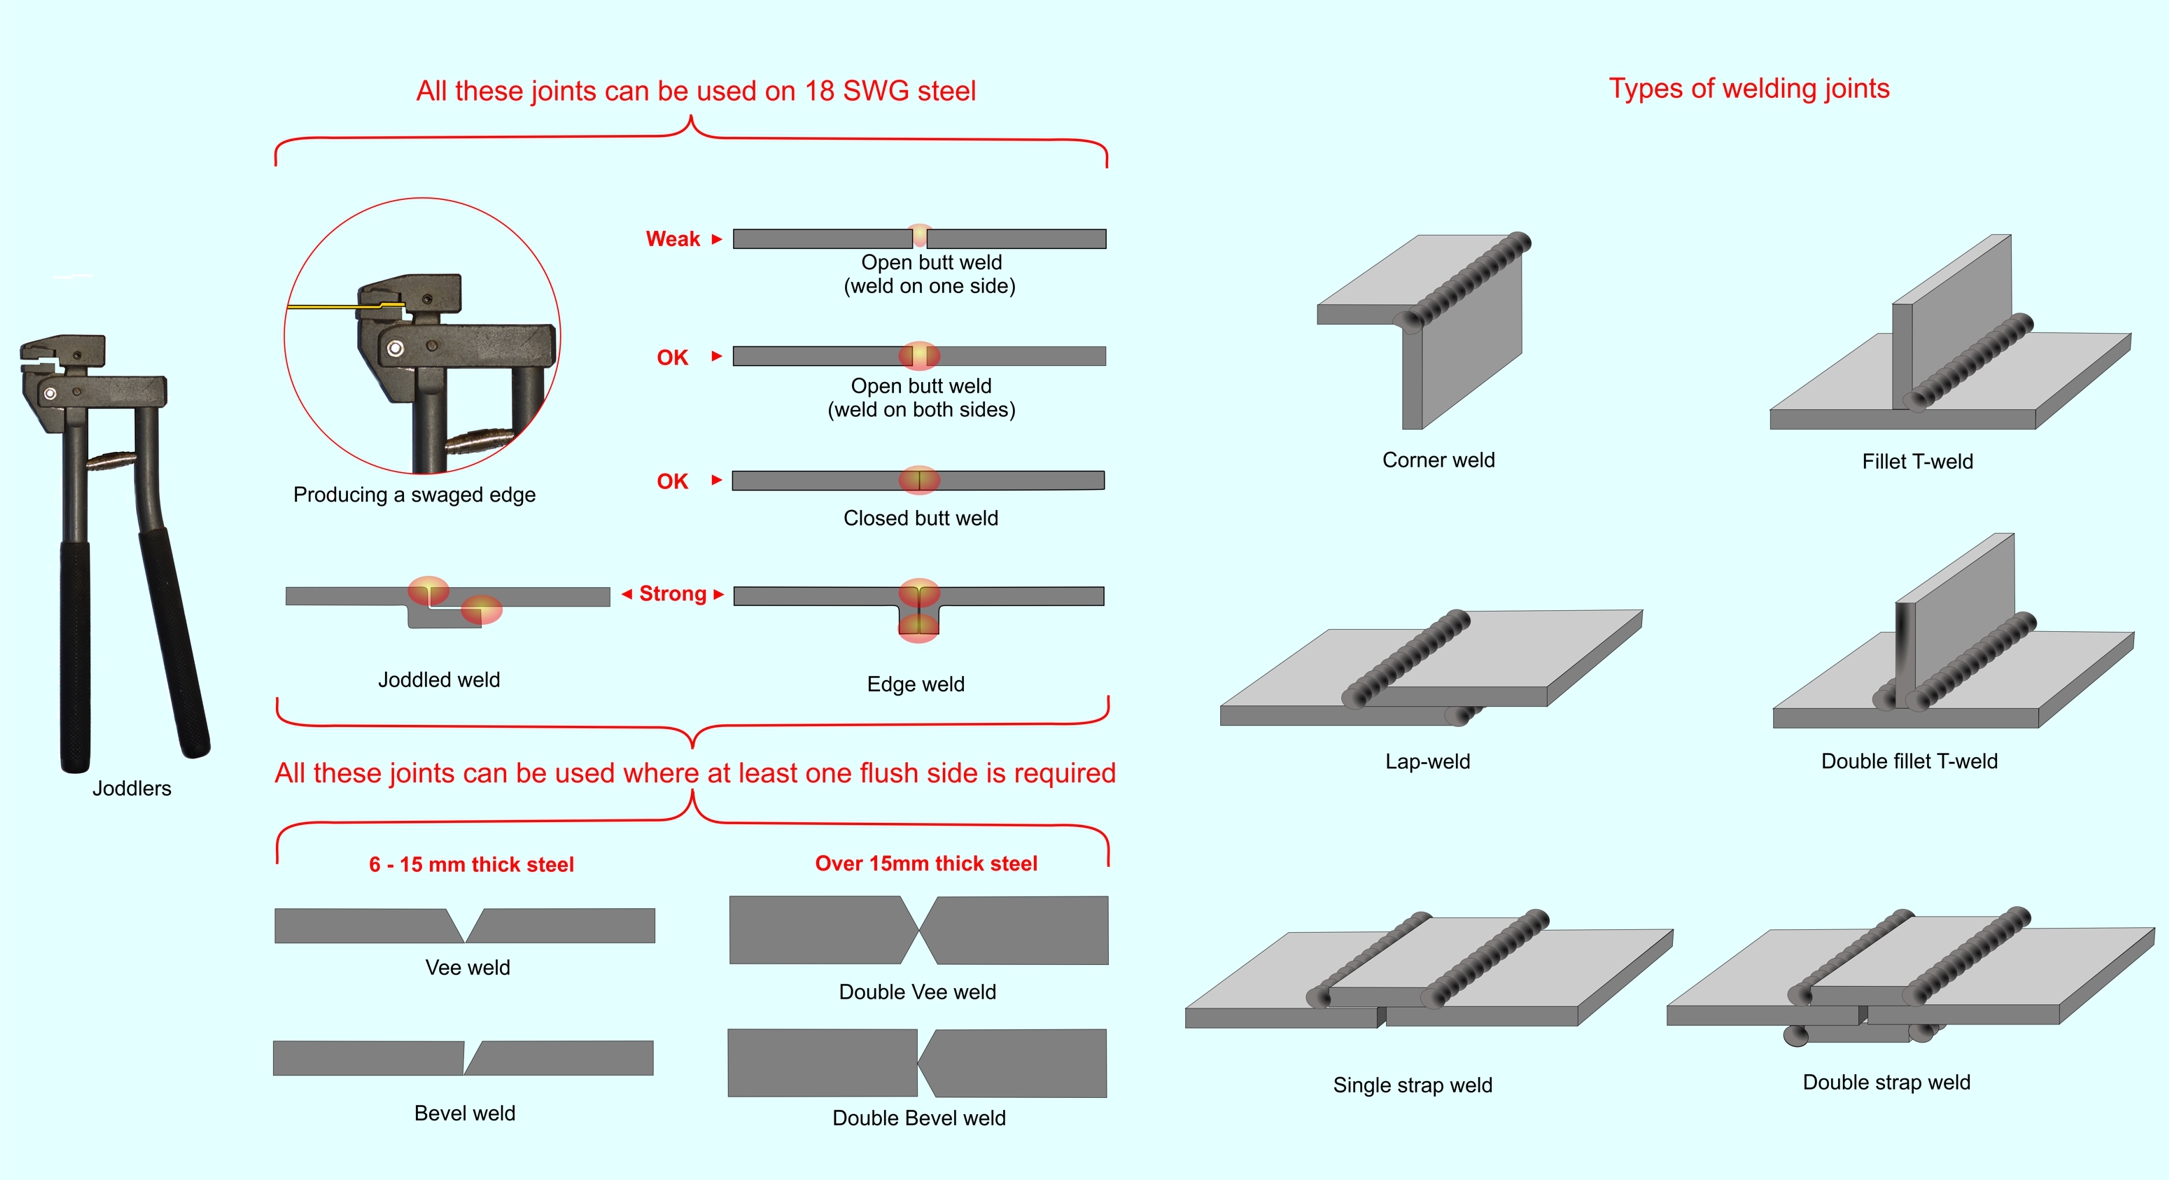 Types of welding joints